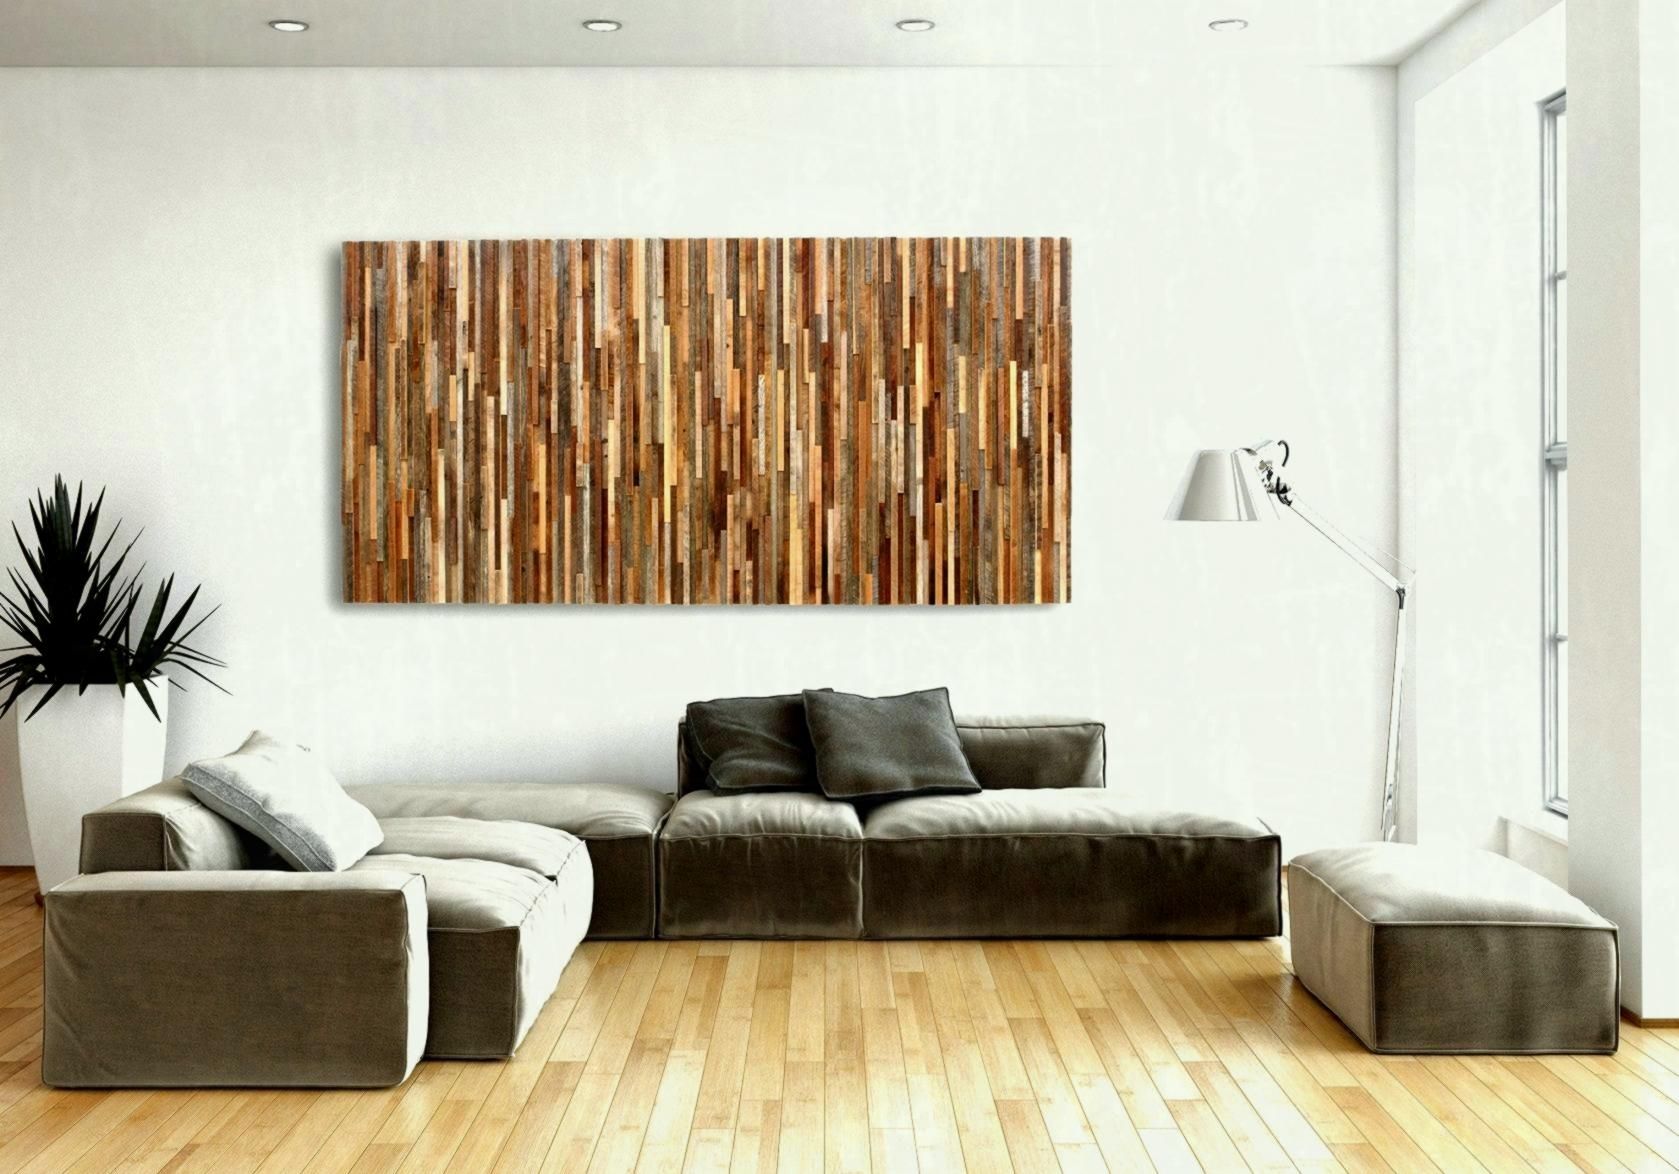 Wood Pallet Wall Art Photo Unique Ideas And Designs Gallery Inside Pallet Wall Art (View 16 of 20)